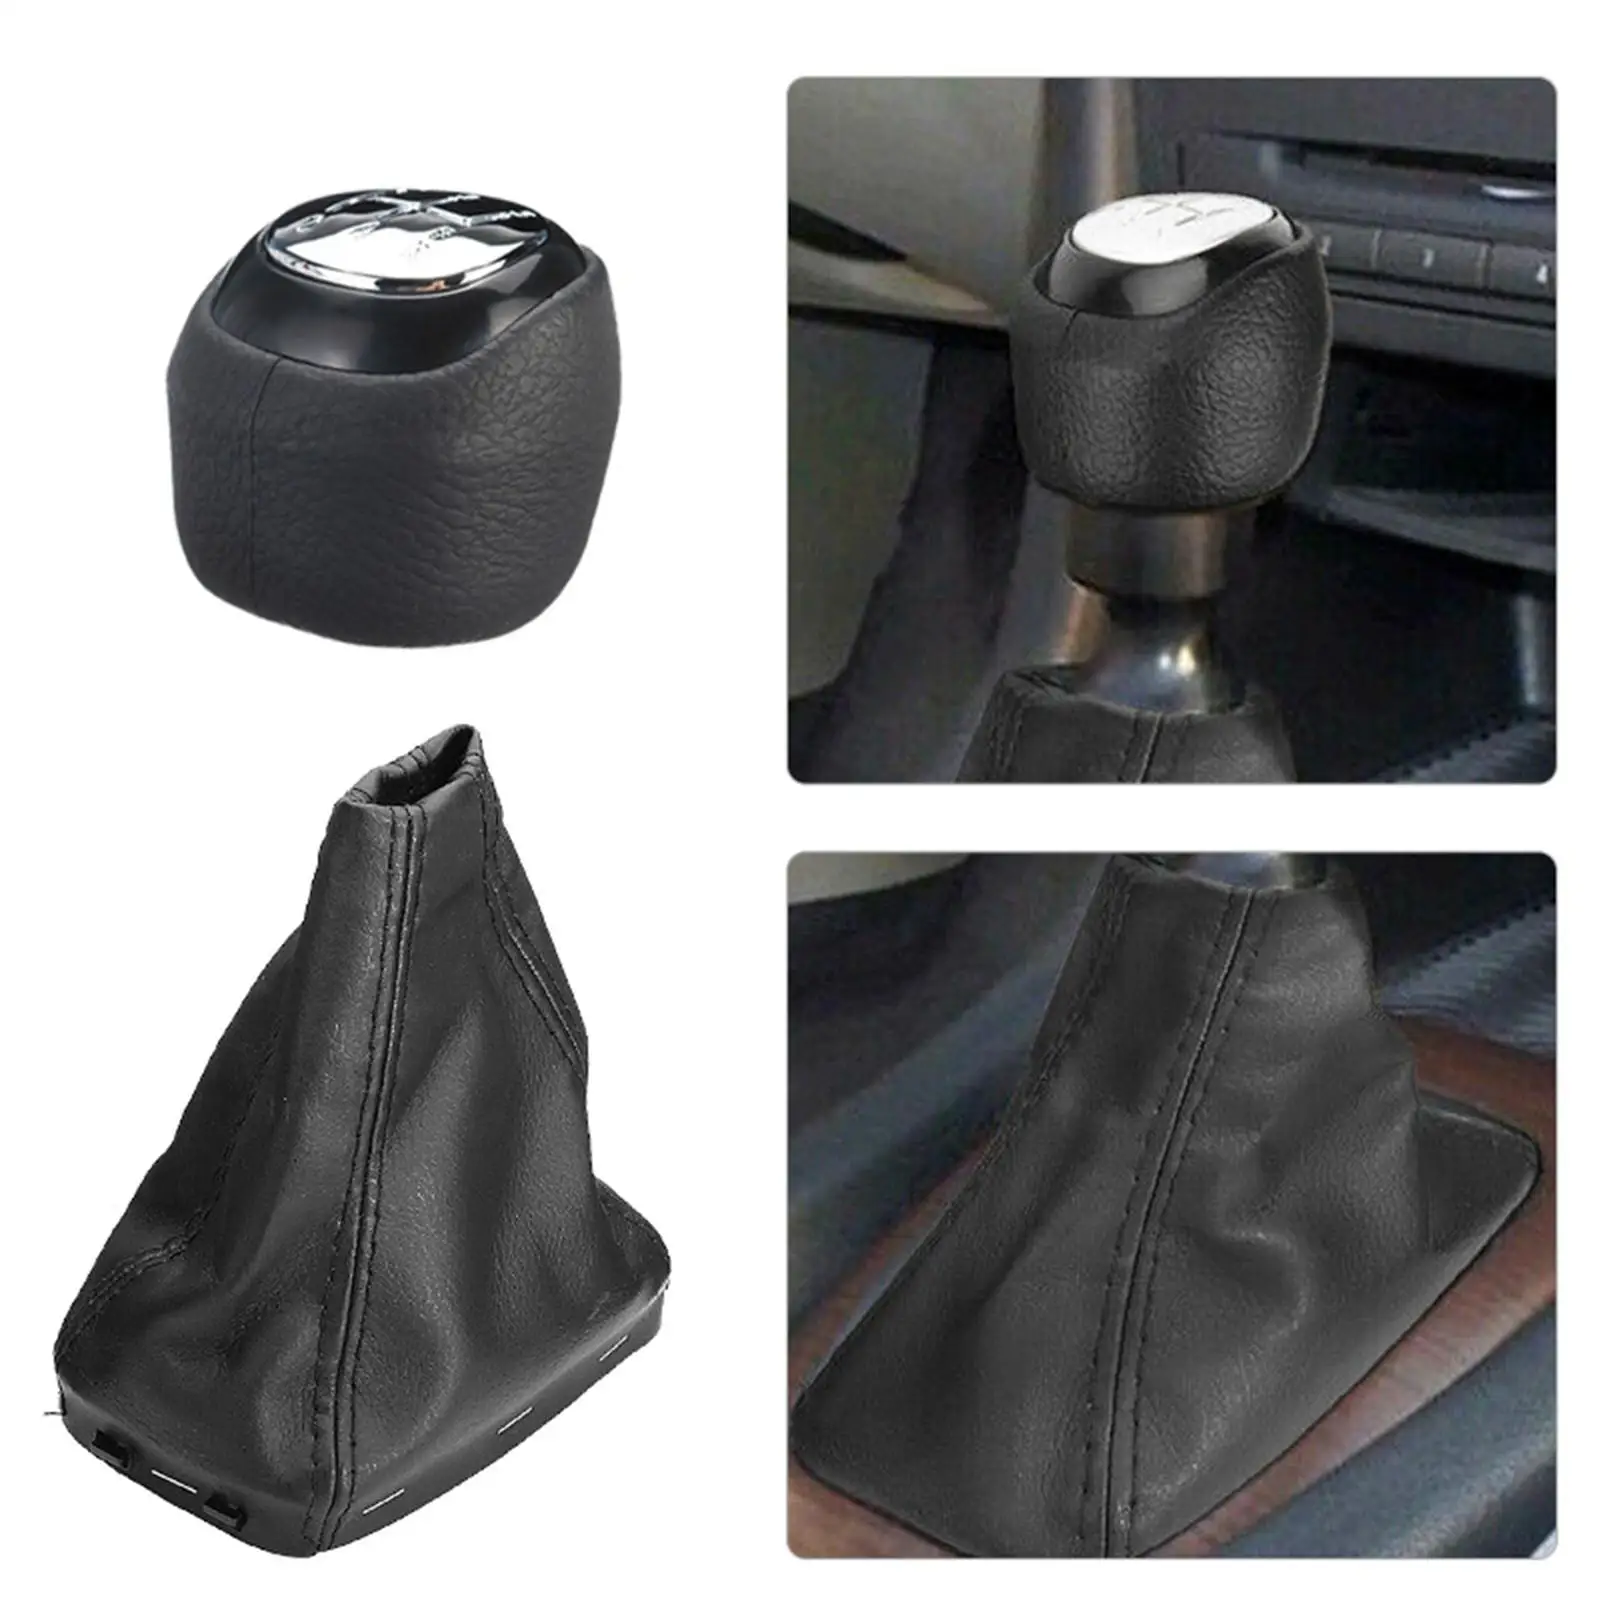 New Universal Auto Accessories Car 5 Speed Gear  Knob Stick er or T-Bar Boot Cover Adapter For SAAB 9-3 2003-2012